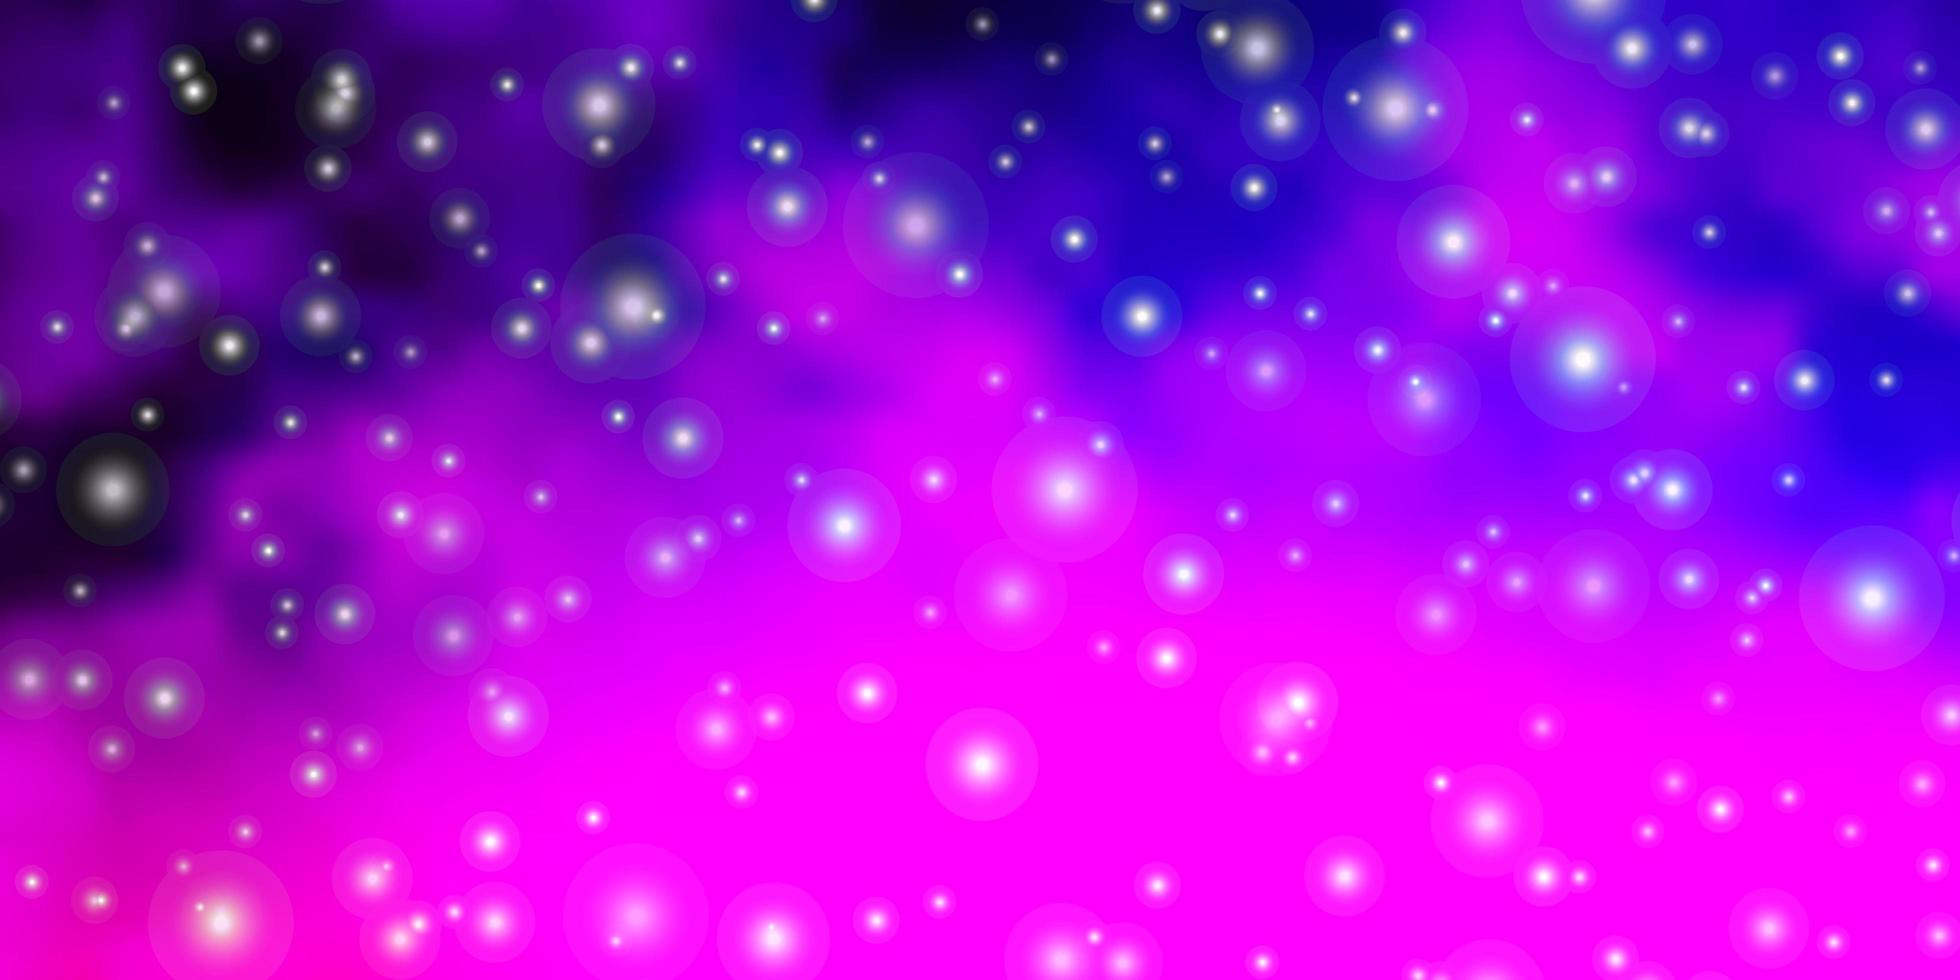 Light Purple, Pink vector template with neon stars. Decorative illustration with stars on abstract template. Design for your business promotion.